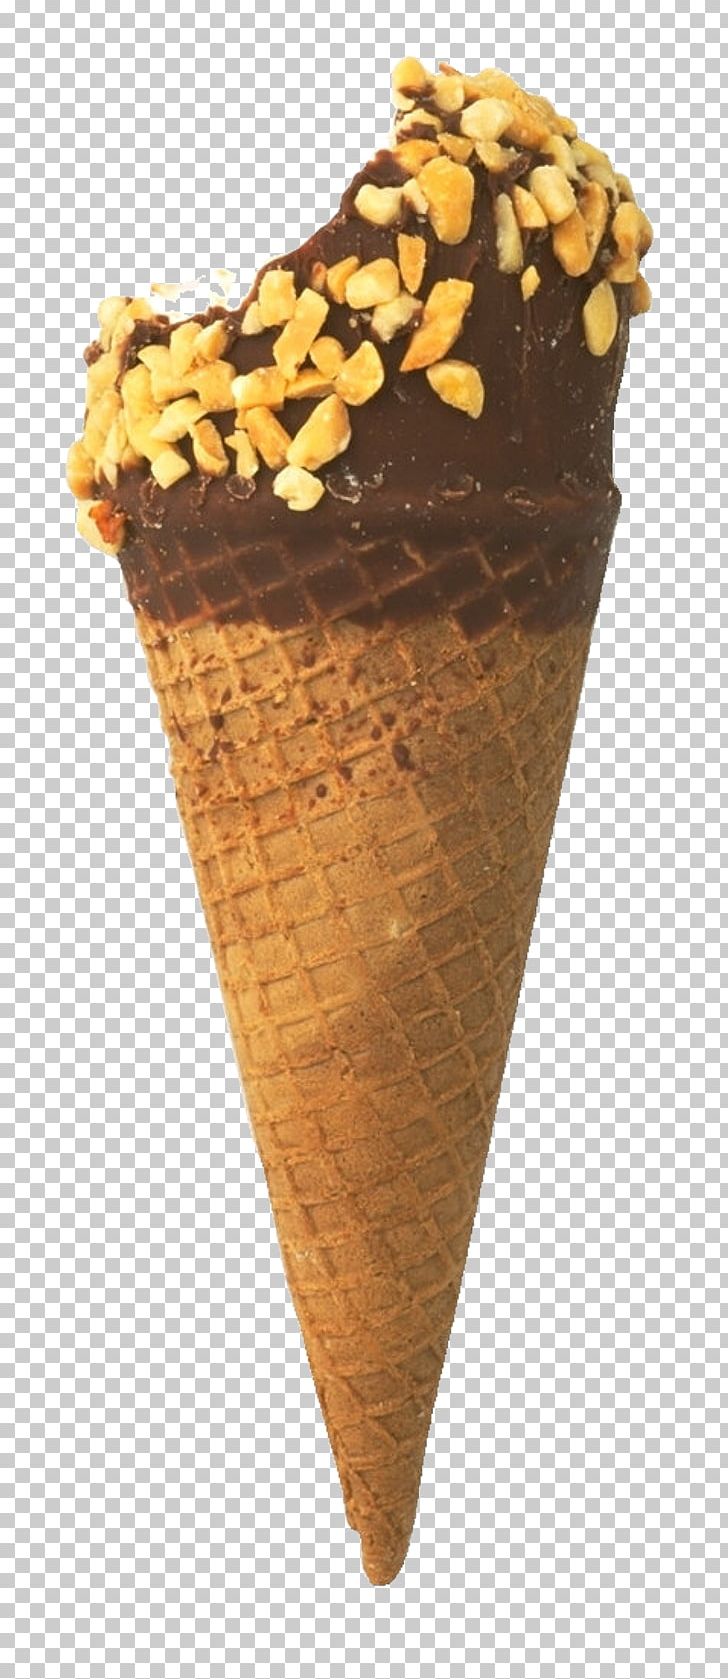 Chocolate Ice Cream Ice Cream Cone Pastry PNG, Clipart, Biscuit, Bread, Candy, Chocolate, Chocolate Ice Cream Free PNG Download